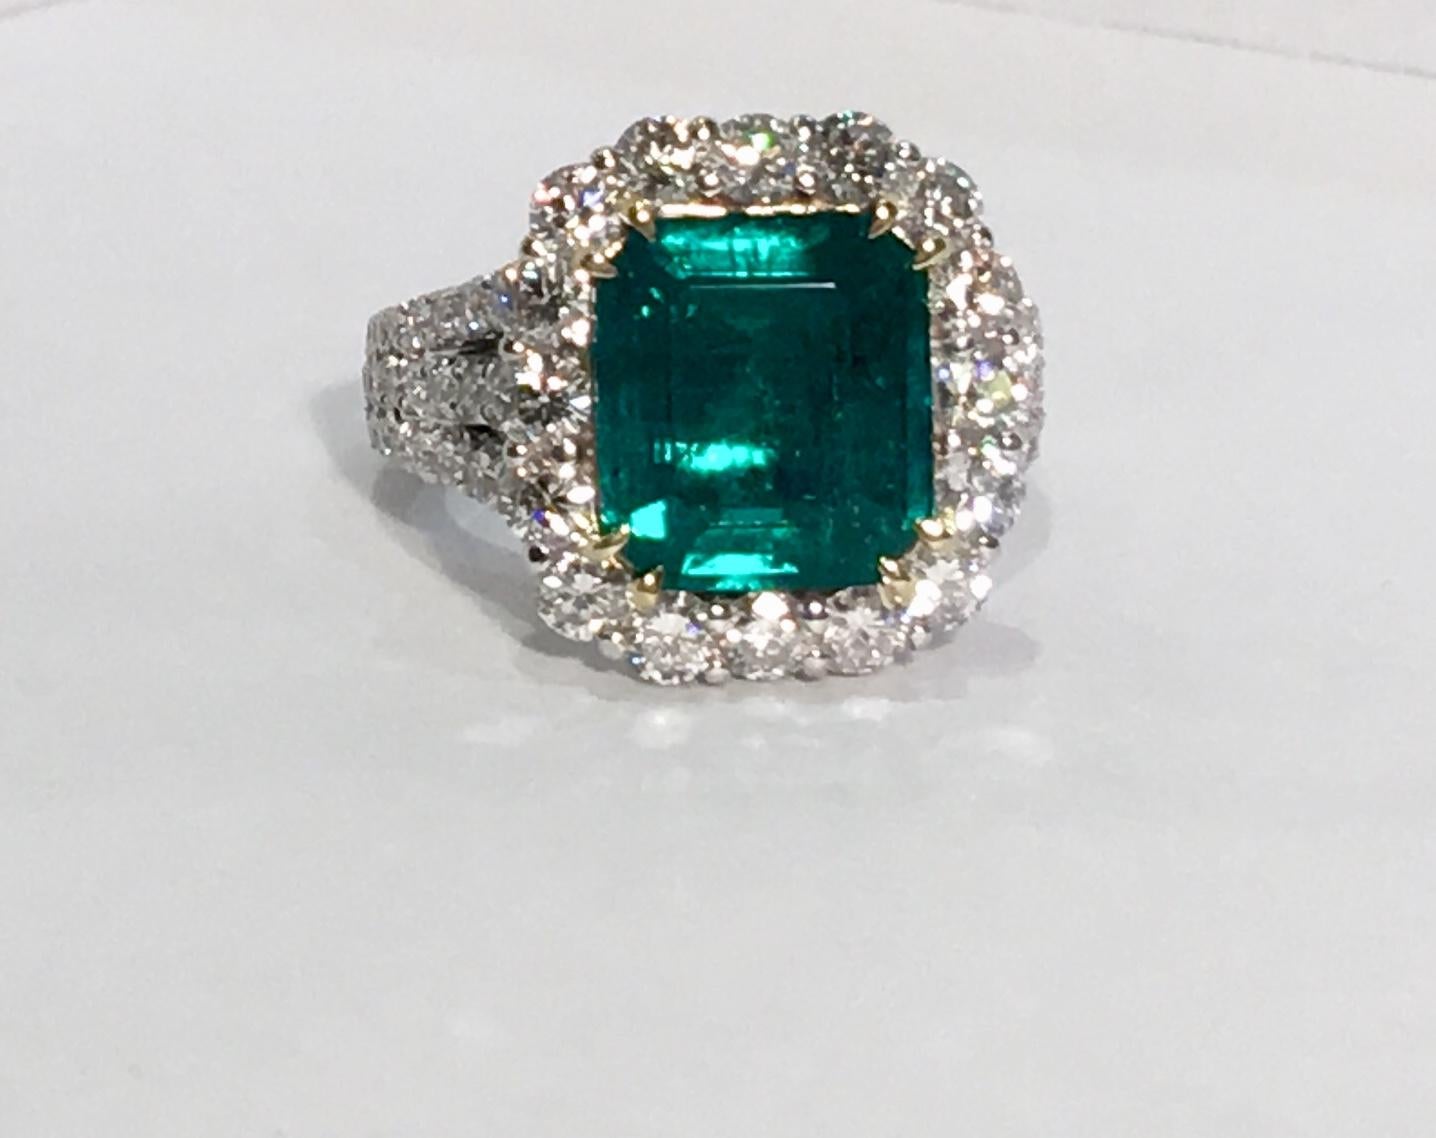 Magnificent, finest quality, 18 karat white gold ring features a GIA certified, F1, octagonal step cut, transparent green Colombian emerald weighing 3.69 carats and measuring 10.94 mm x 9.73 mm x 4.72 mm. GIA certificate #1176234276. The emerald is